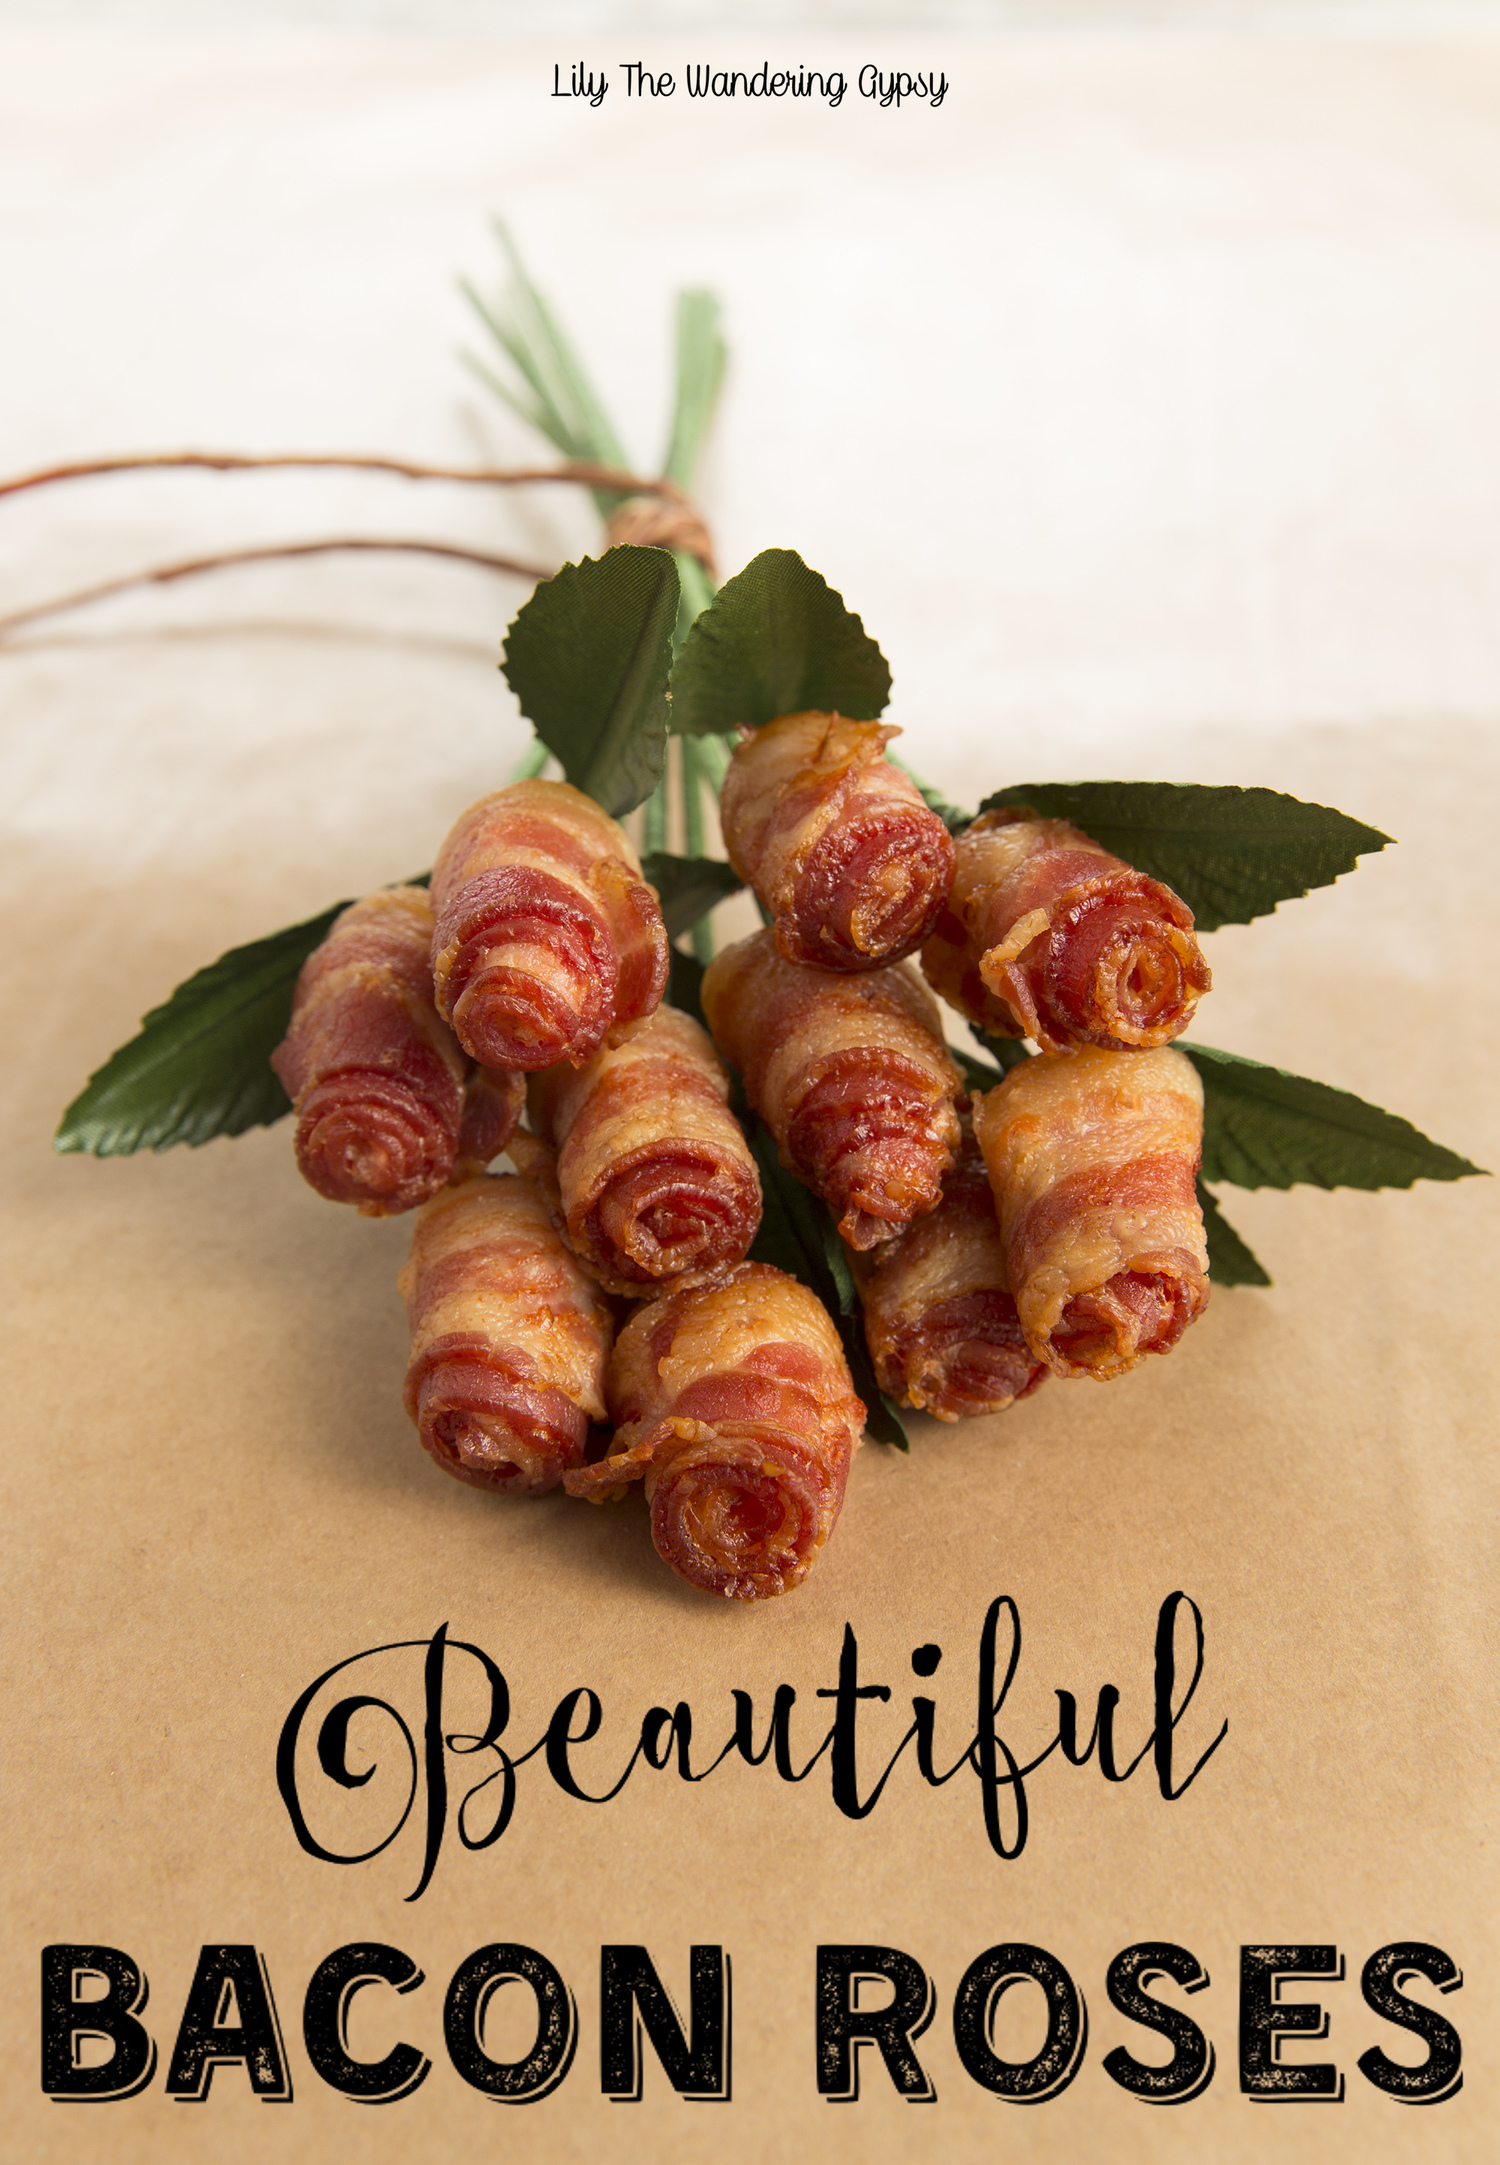 A Bouquet of Bacon Roses! — Lily The Wandering Gypsy